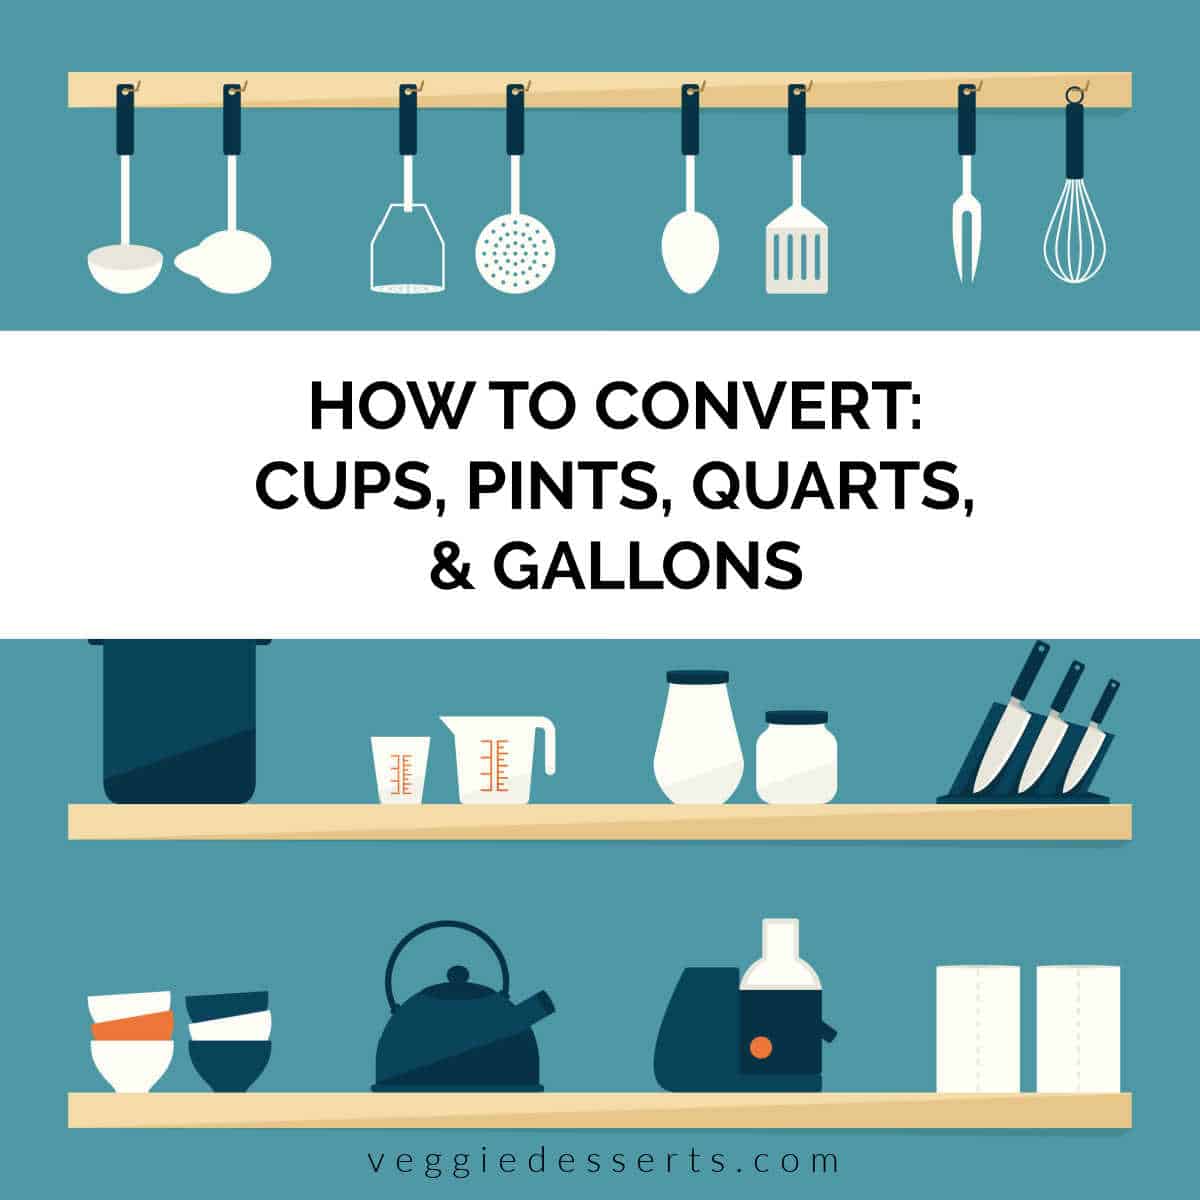 Illustration with text: how to convert cups, pints, quarts and gallons.